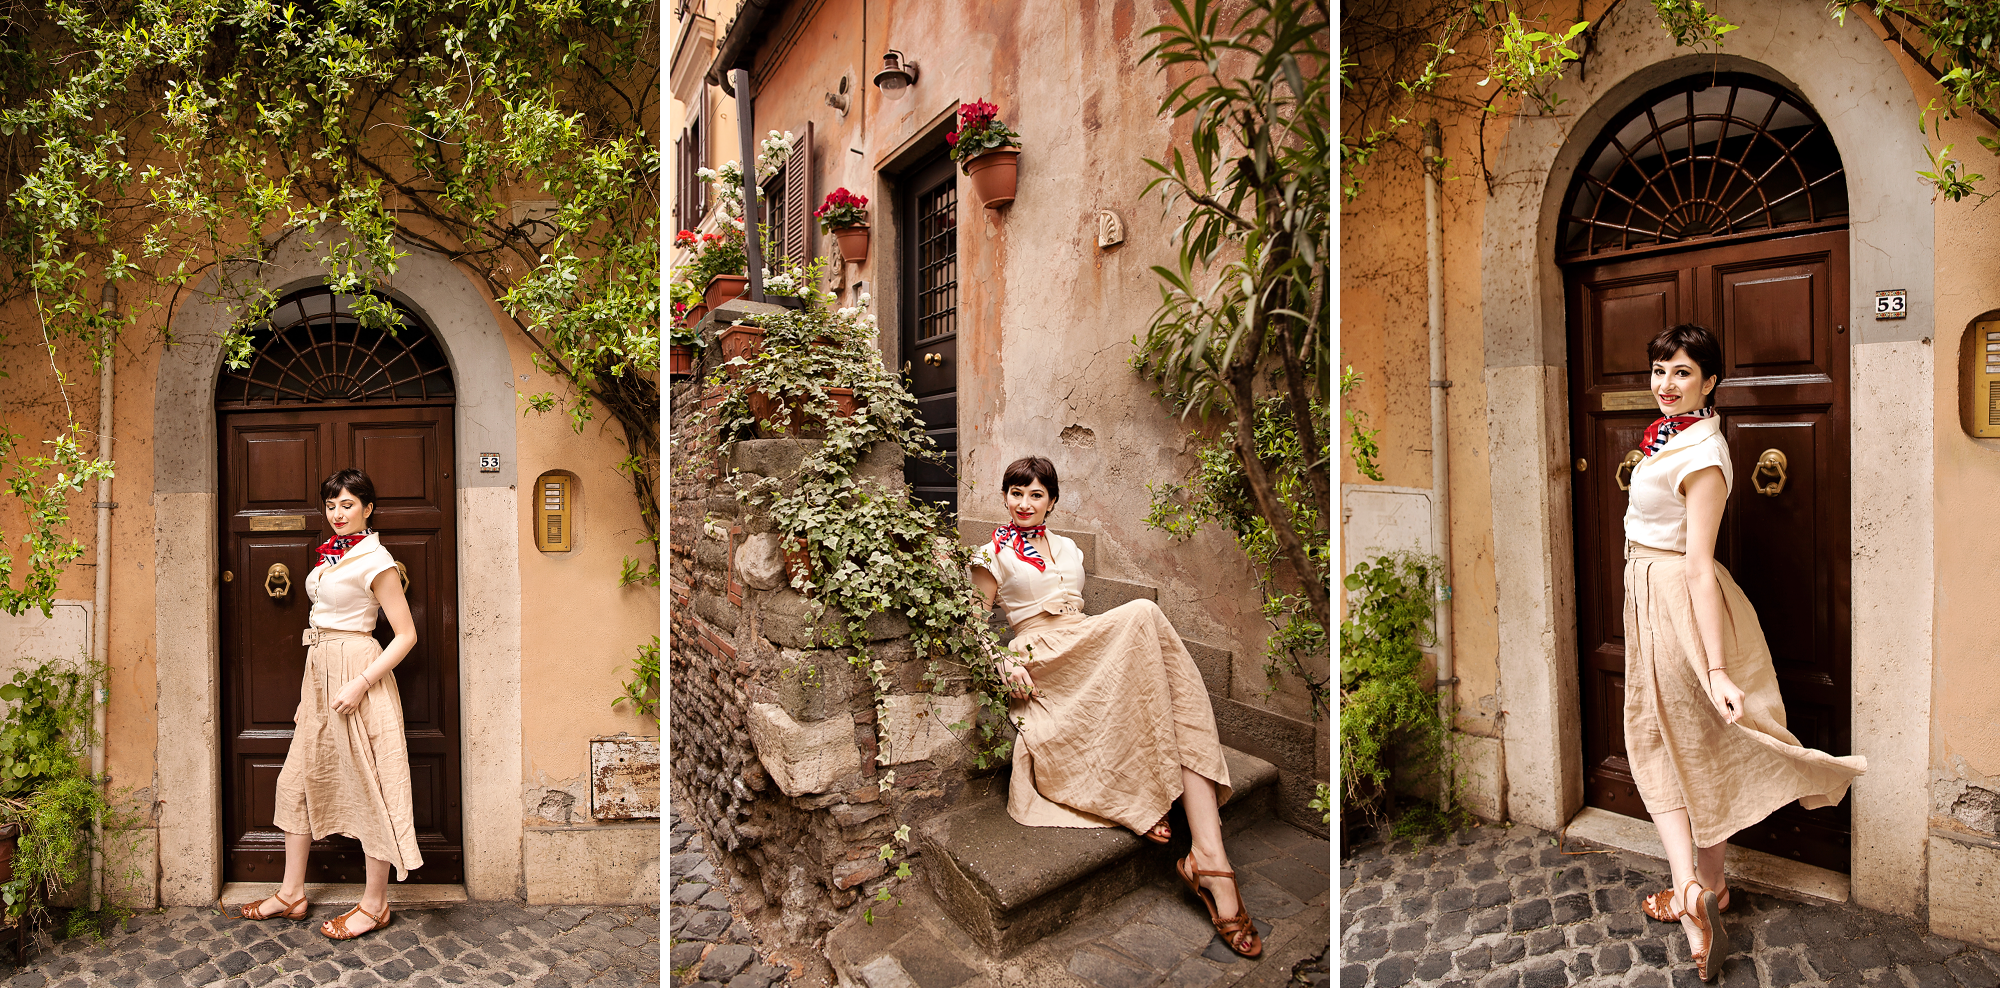 Honeymoon, vacation, family, engagement, maternity, love story individual and solo photoshoots in Rome, Italy by photographer Tricia Anne Photography | Rome Photographer, vacation, tripadvisor, instagram, fun, married, love, story, photography, session, photoshoot, wedding photographer, vacation photographer, engagement photo, honeymoon photoshoot, rome honeymoon, rome wedding, elopement in Rome, honeymoon photographer rome, Solo Photo shoot, Rome Photography, Photo Shoot Trastevere, Solo trip to Rome, What to do in Rome, Solo traveler, Trastevere, Trastevere solo photo shoot